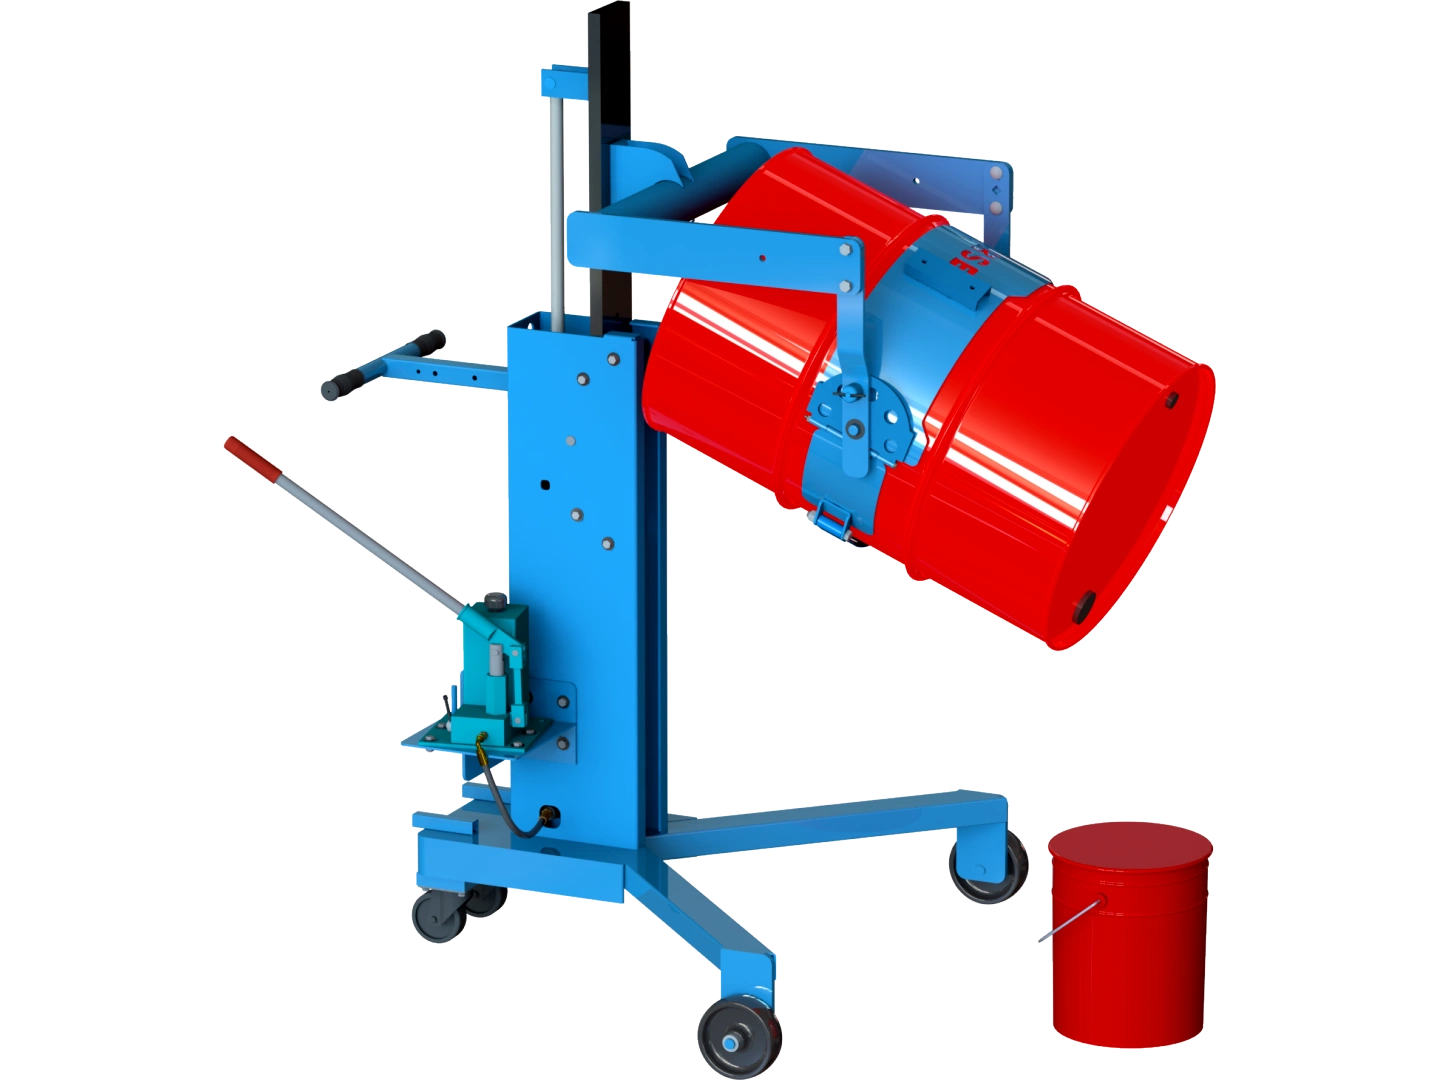 Grip drum by hand to pour and up to 26" (66 cm) high - Model 82A shown